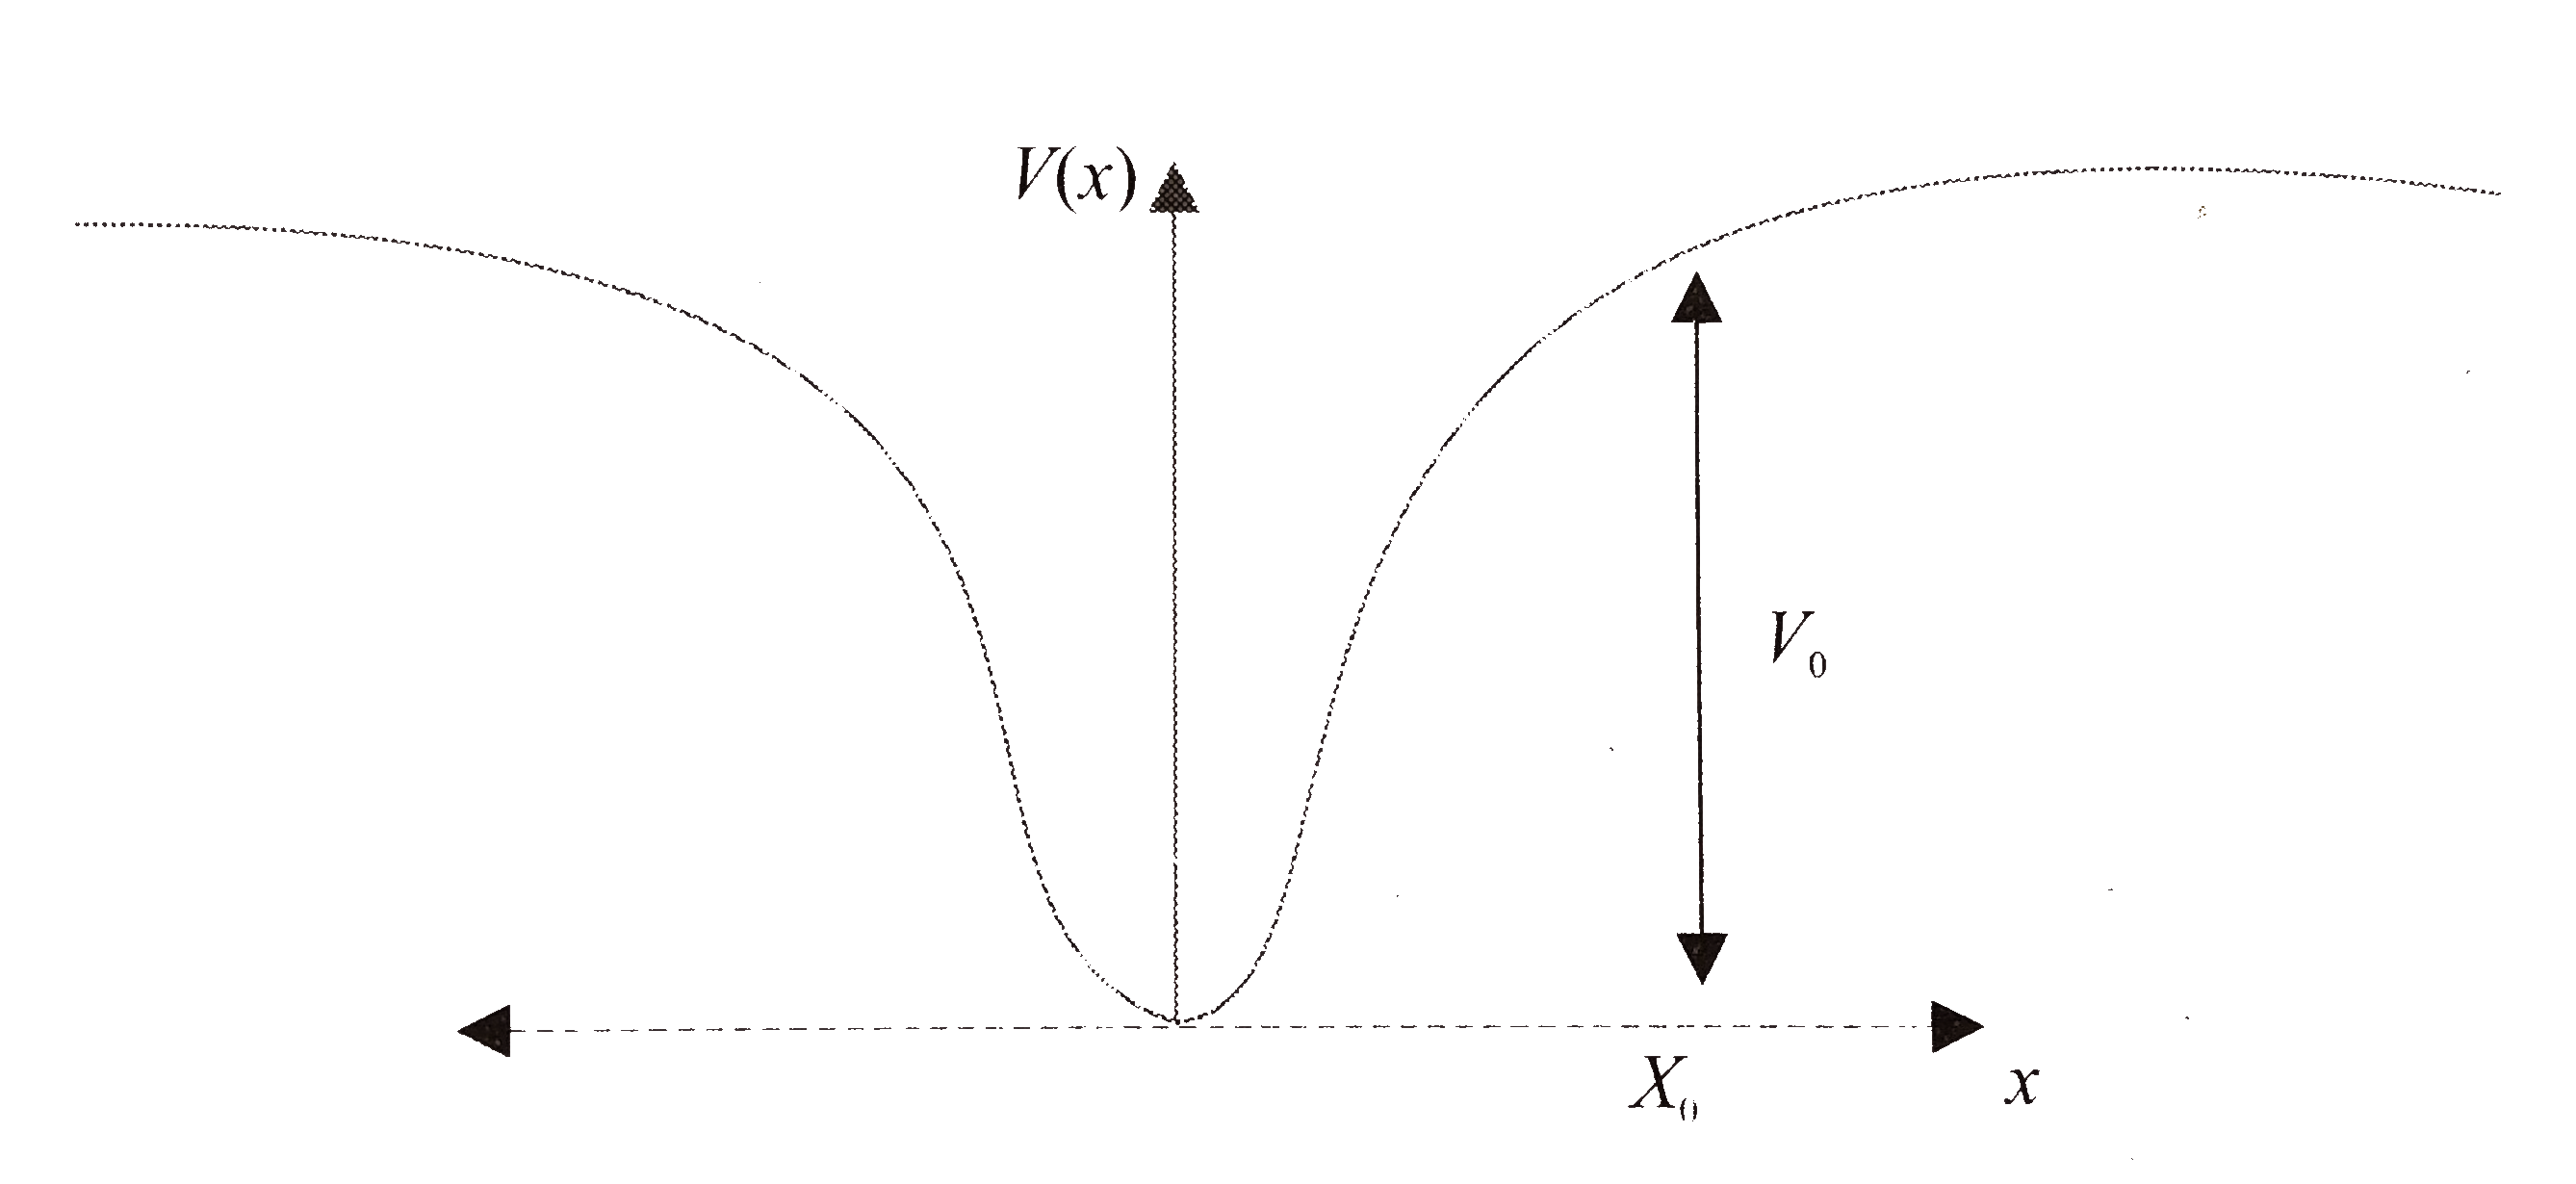 When a particle of mass m moves on the x-axis in potential of the from V(x) = kx^2 it performs simple harmonic motion. The corresponding time period is proportional to m, k as can be seen easily using dimensional analysis. However, the motion of a particle can be periodic even when its potential energy increases on both sides of x = 0 in a way different from kx^2 and its total energy is such that the particle does not escape to infinity. Consider a particle of mass m moving on the x-axis. Its potential energy is V(x) = prop x^4(prop gt 0) fro |x| near the origin and becomes a constant equal to V0 for |x| ge X0 (see Fig. 8.12).      If the total energy of the particle is E. it will perform periodic motion only if.